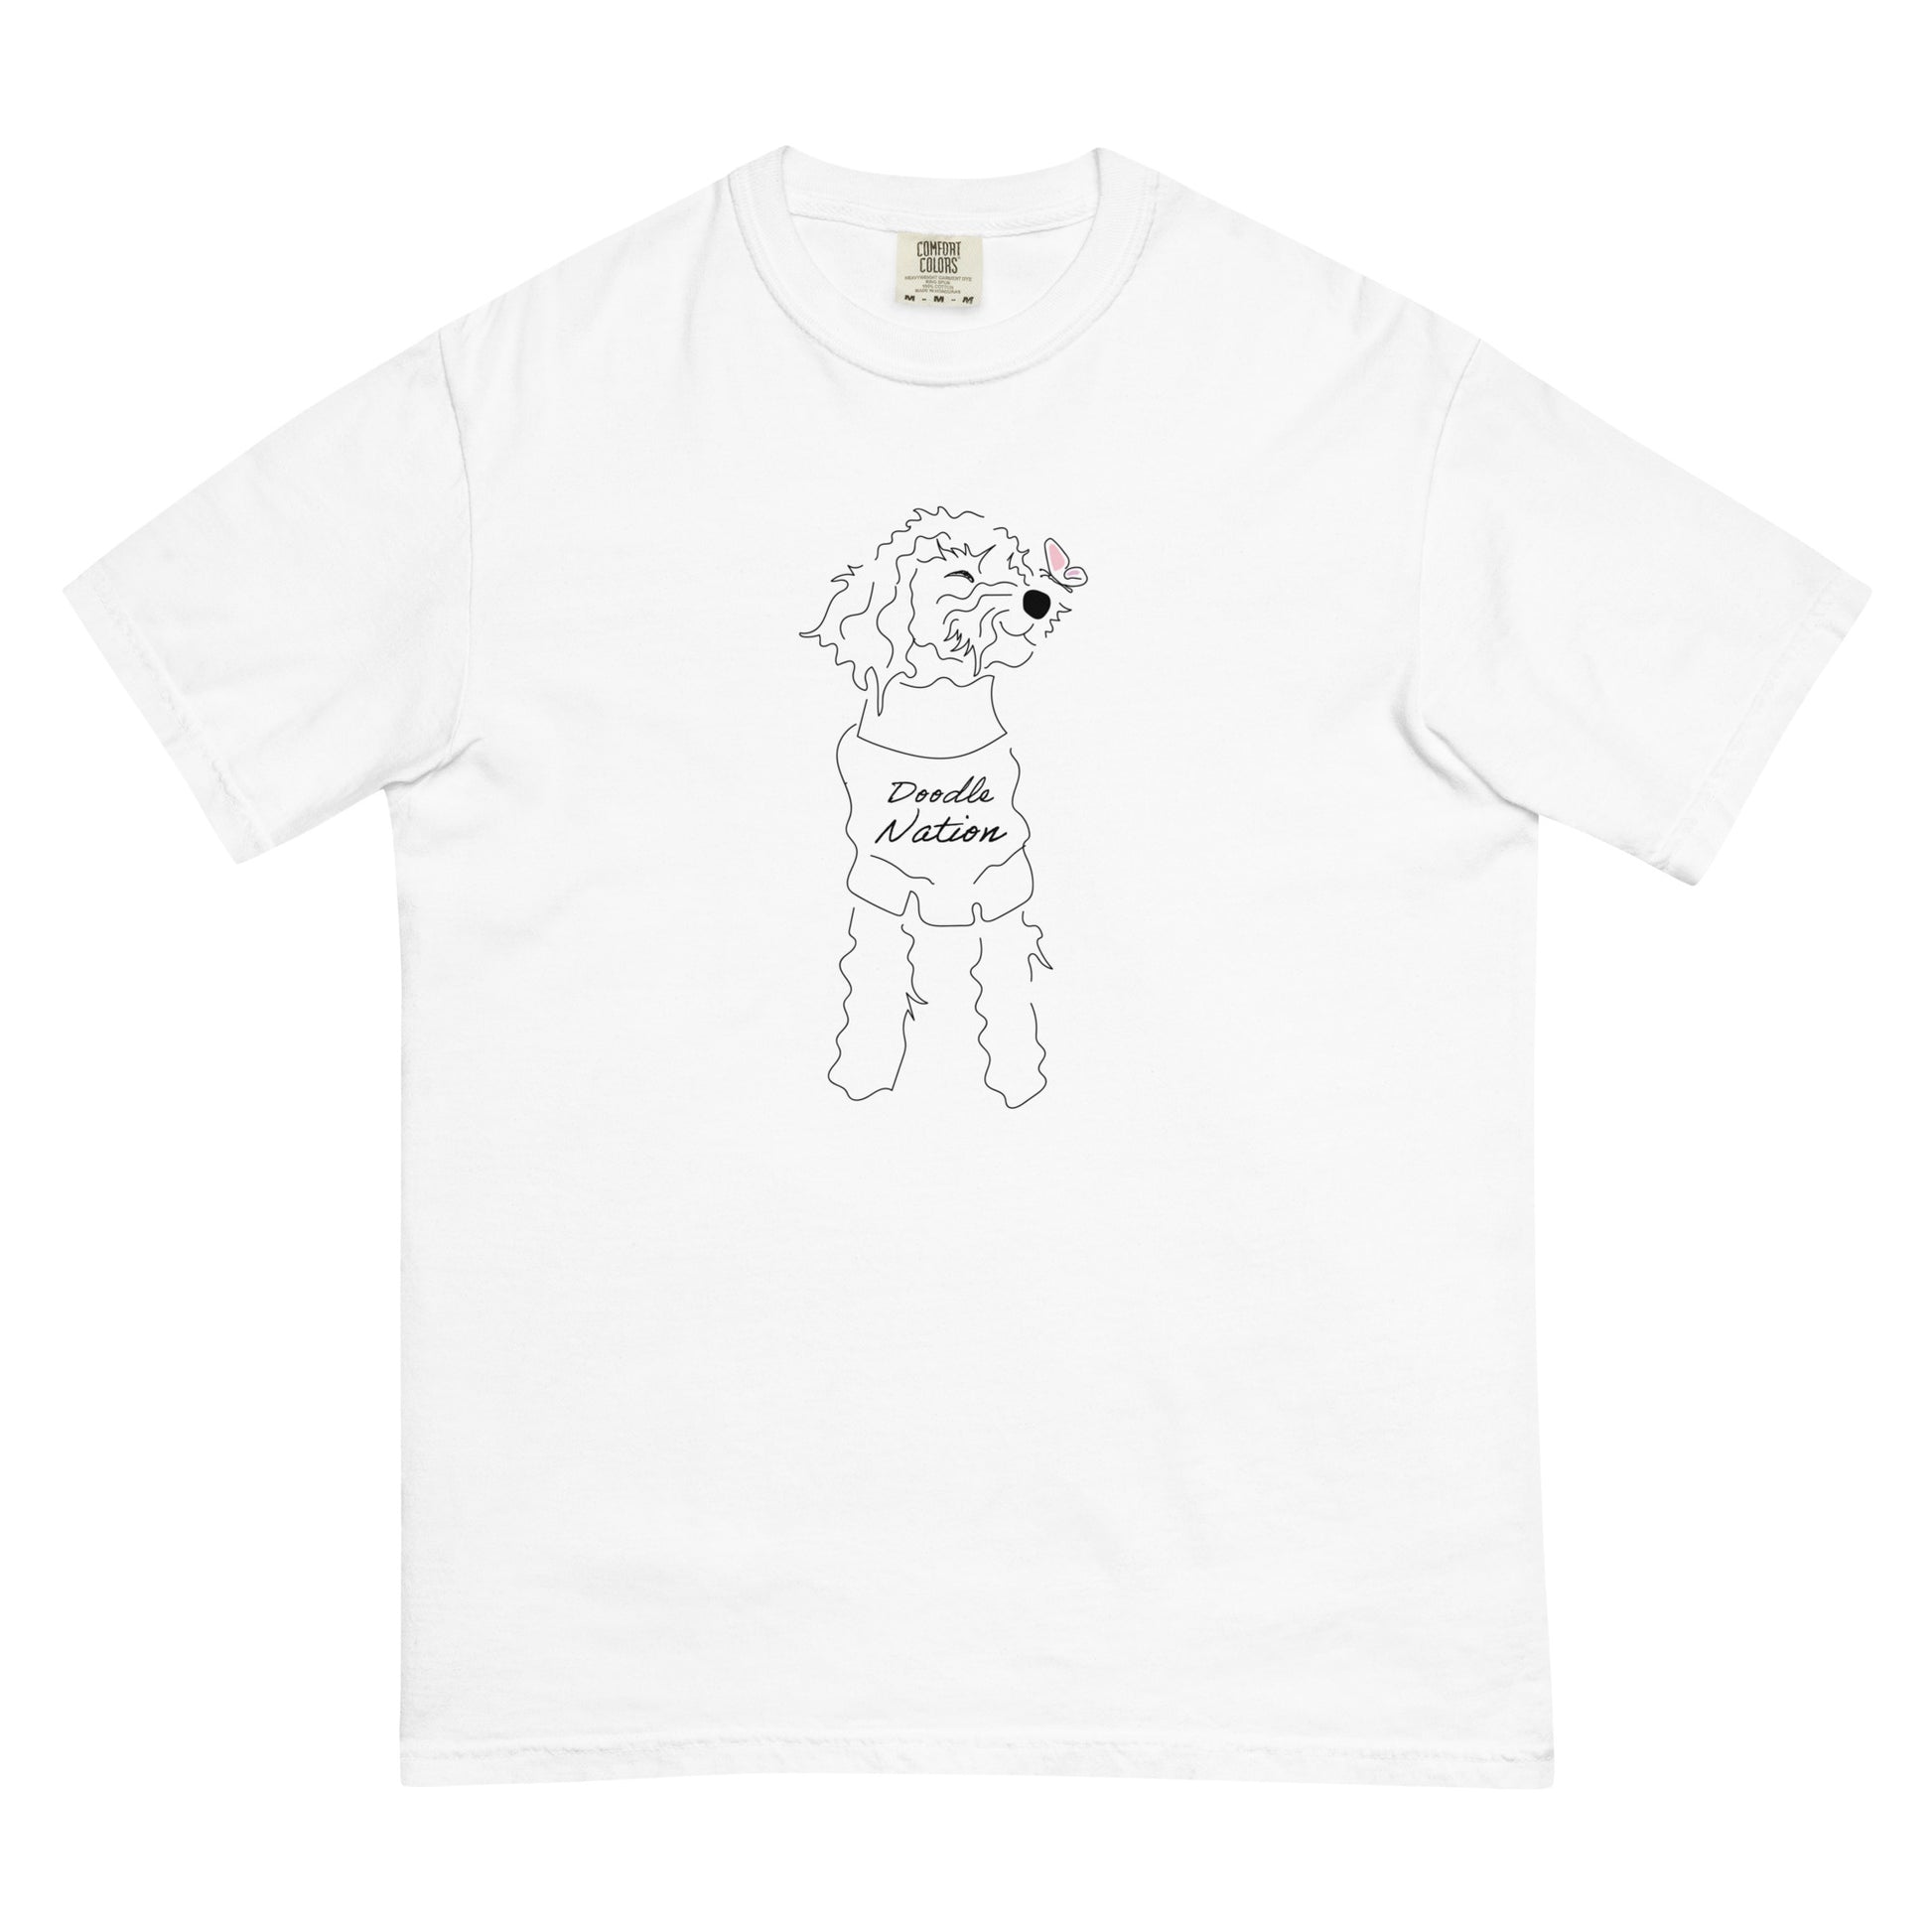 Goldendoodle comfort colors t-shirt with Goldendoodle dog and words "Doodle Nation" in white color